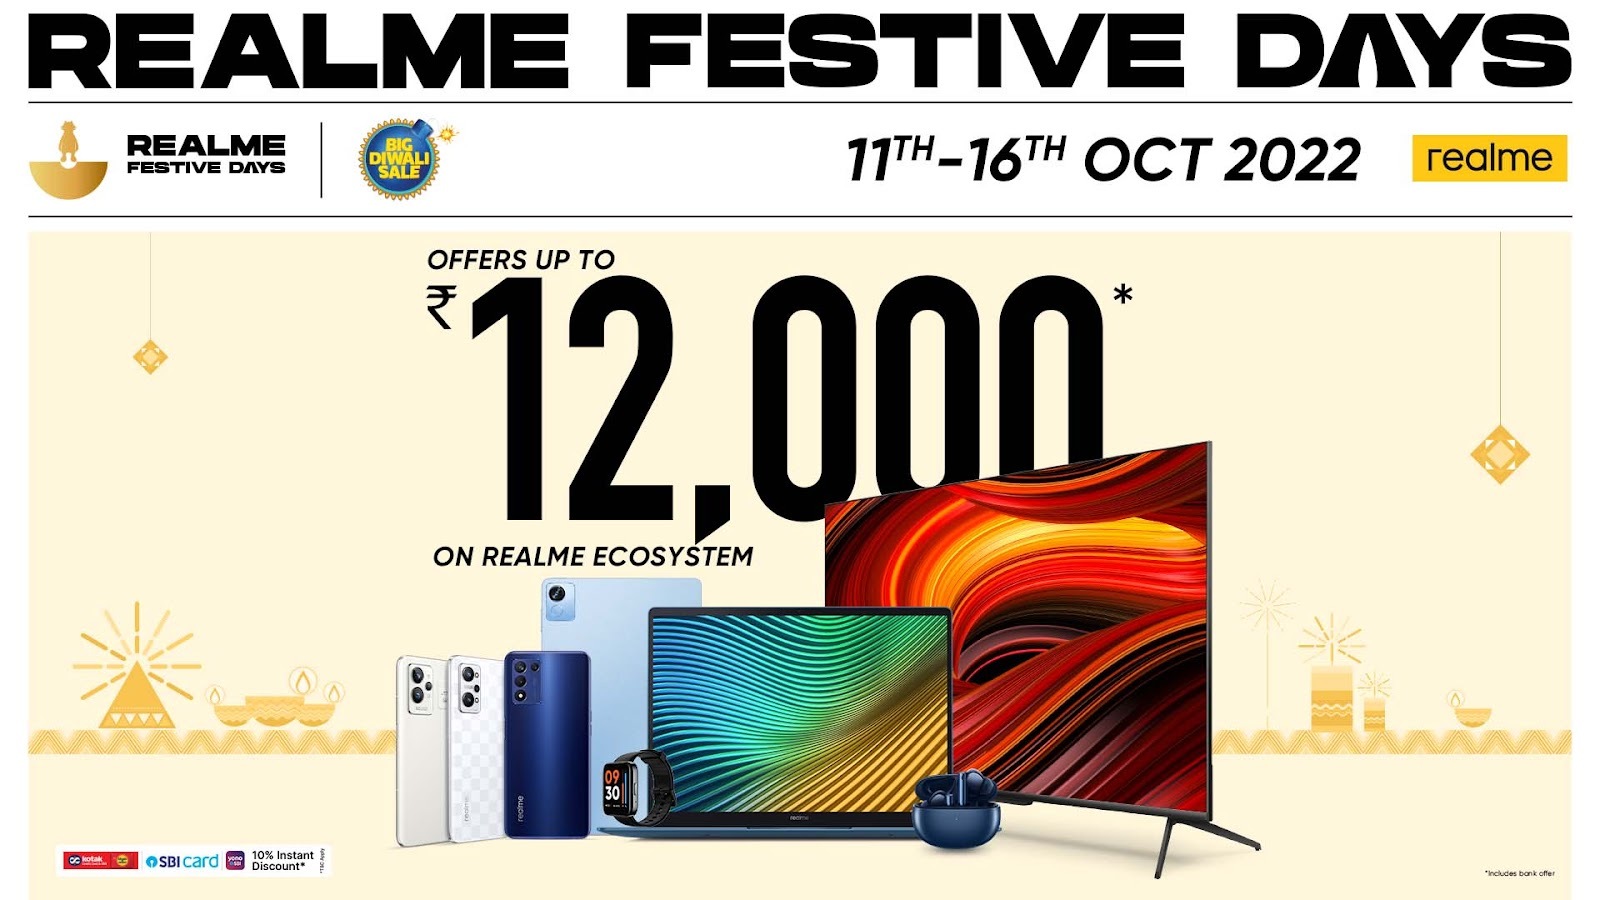 Realme C30 available at Rs 7,499: Where to buy? – India TV